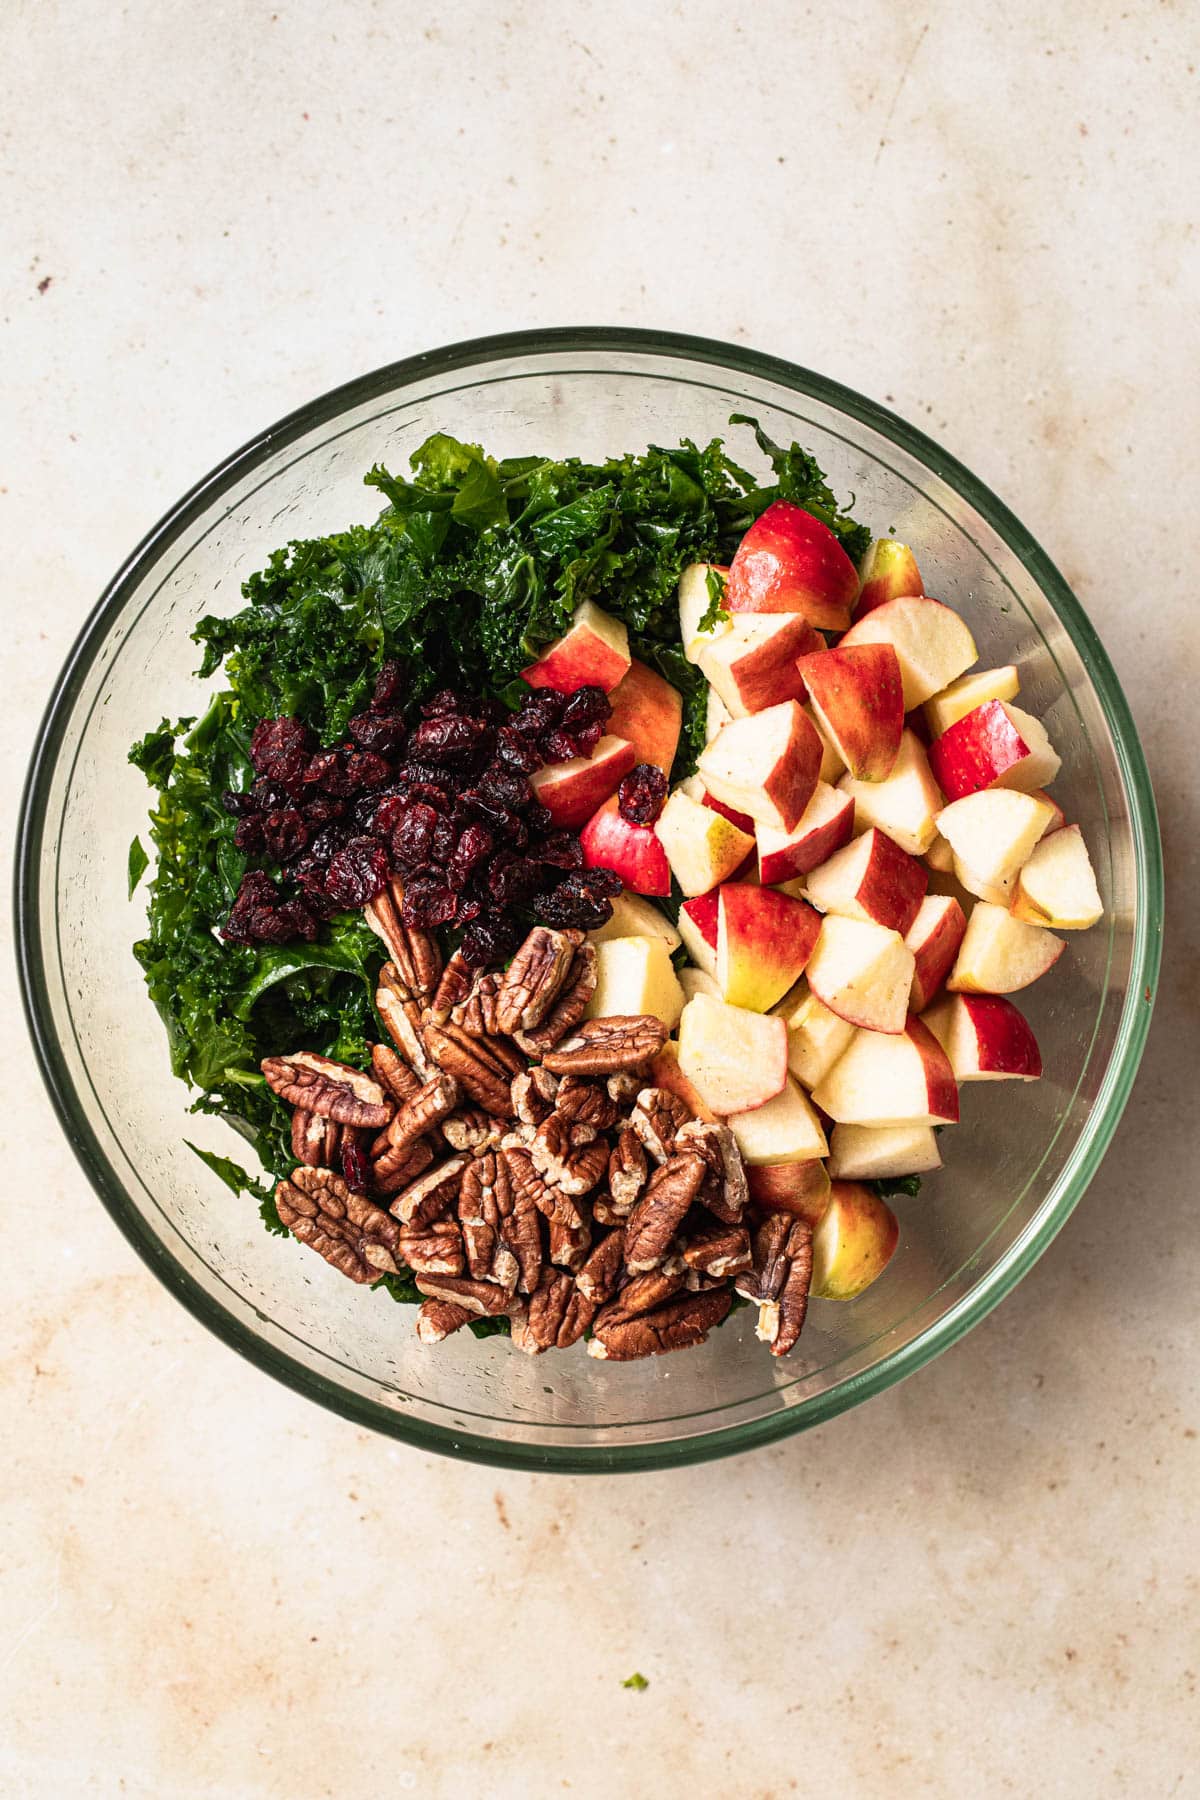 Massaged kale, pecans, cranberries and diced red apples in a bowl.